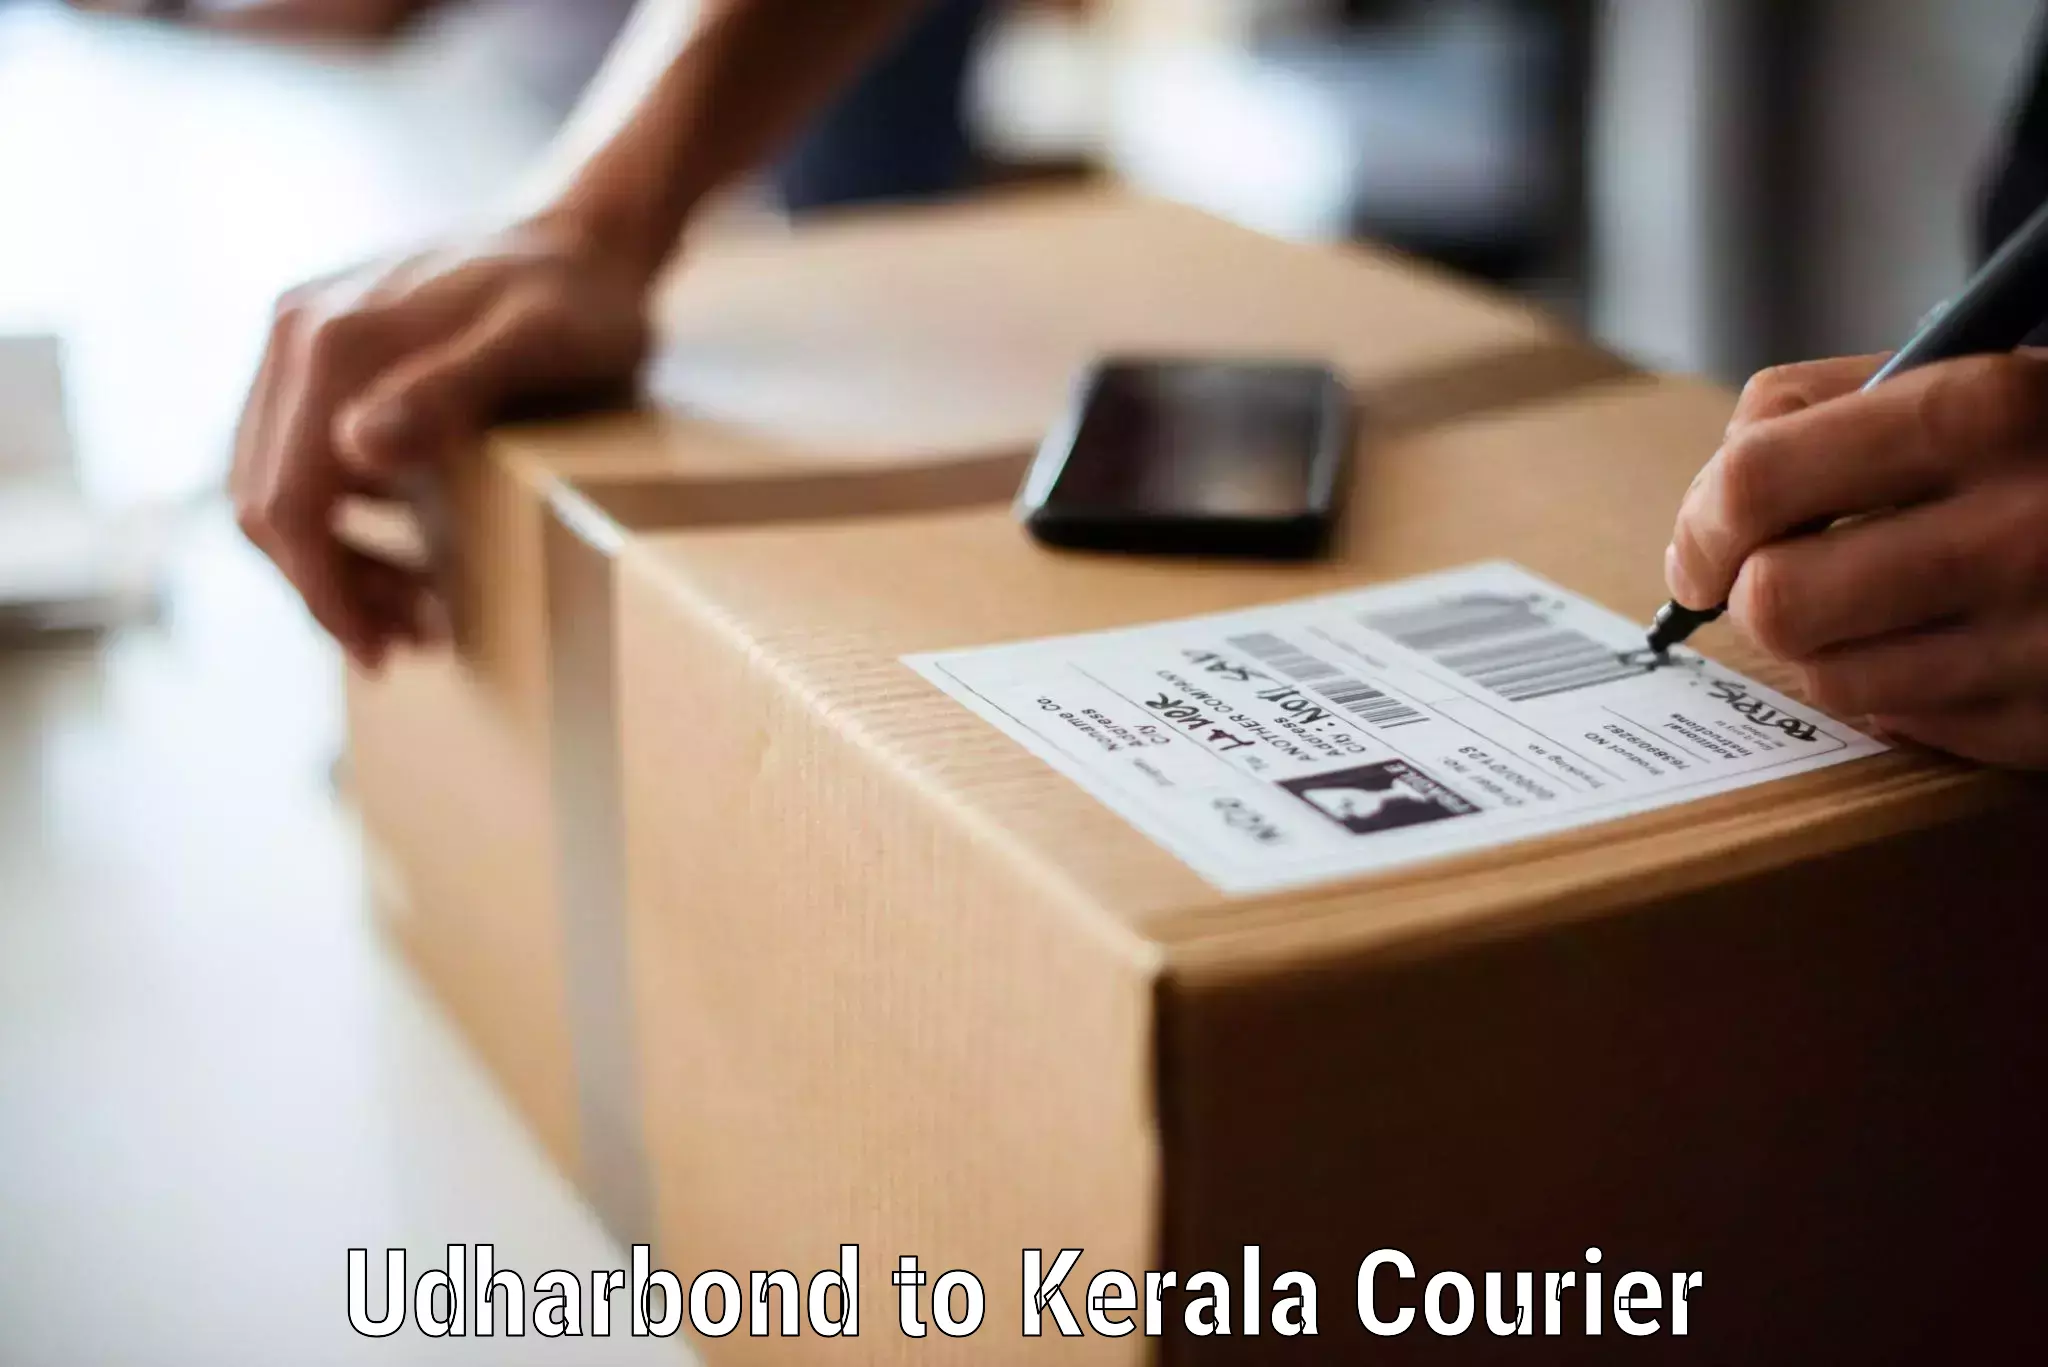 Moving and storage services Udharbond to Kerala